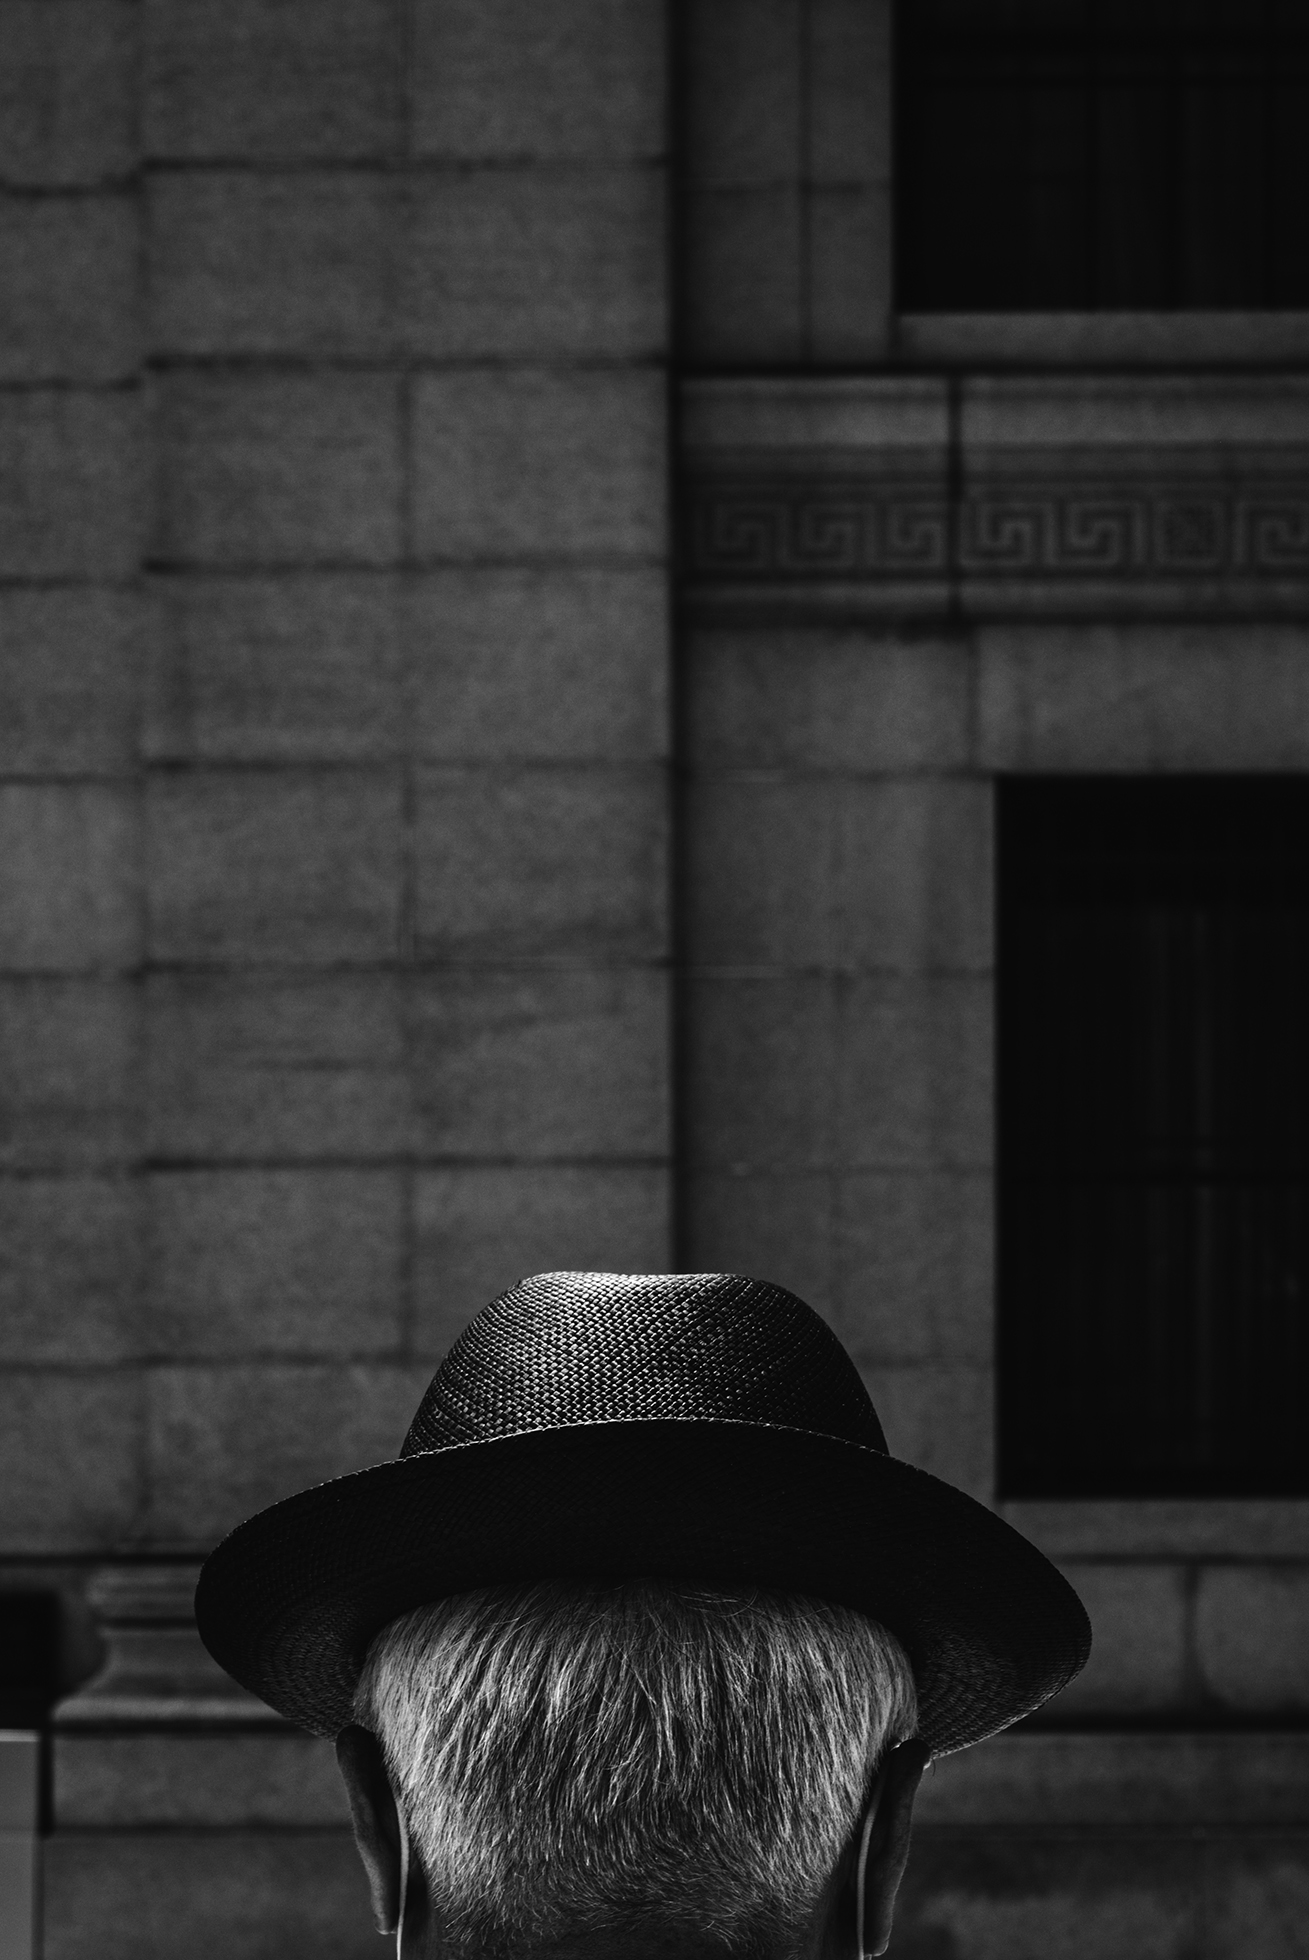 An old man in a fedora stands in front of a large stone multistoried building. Since the man is seen from behind at the bottom of the image and only from the bottom of the ears up, the building is imposing as it spans the image from top to bottom.